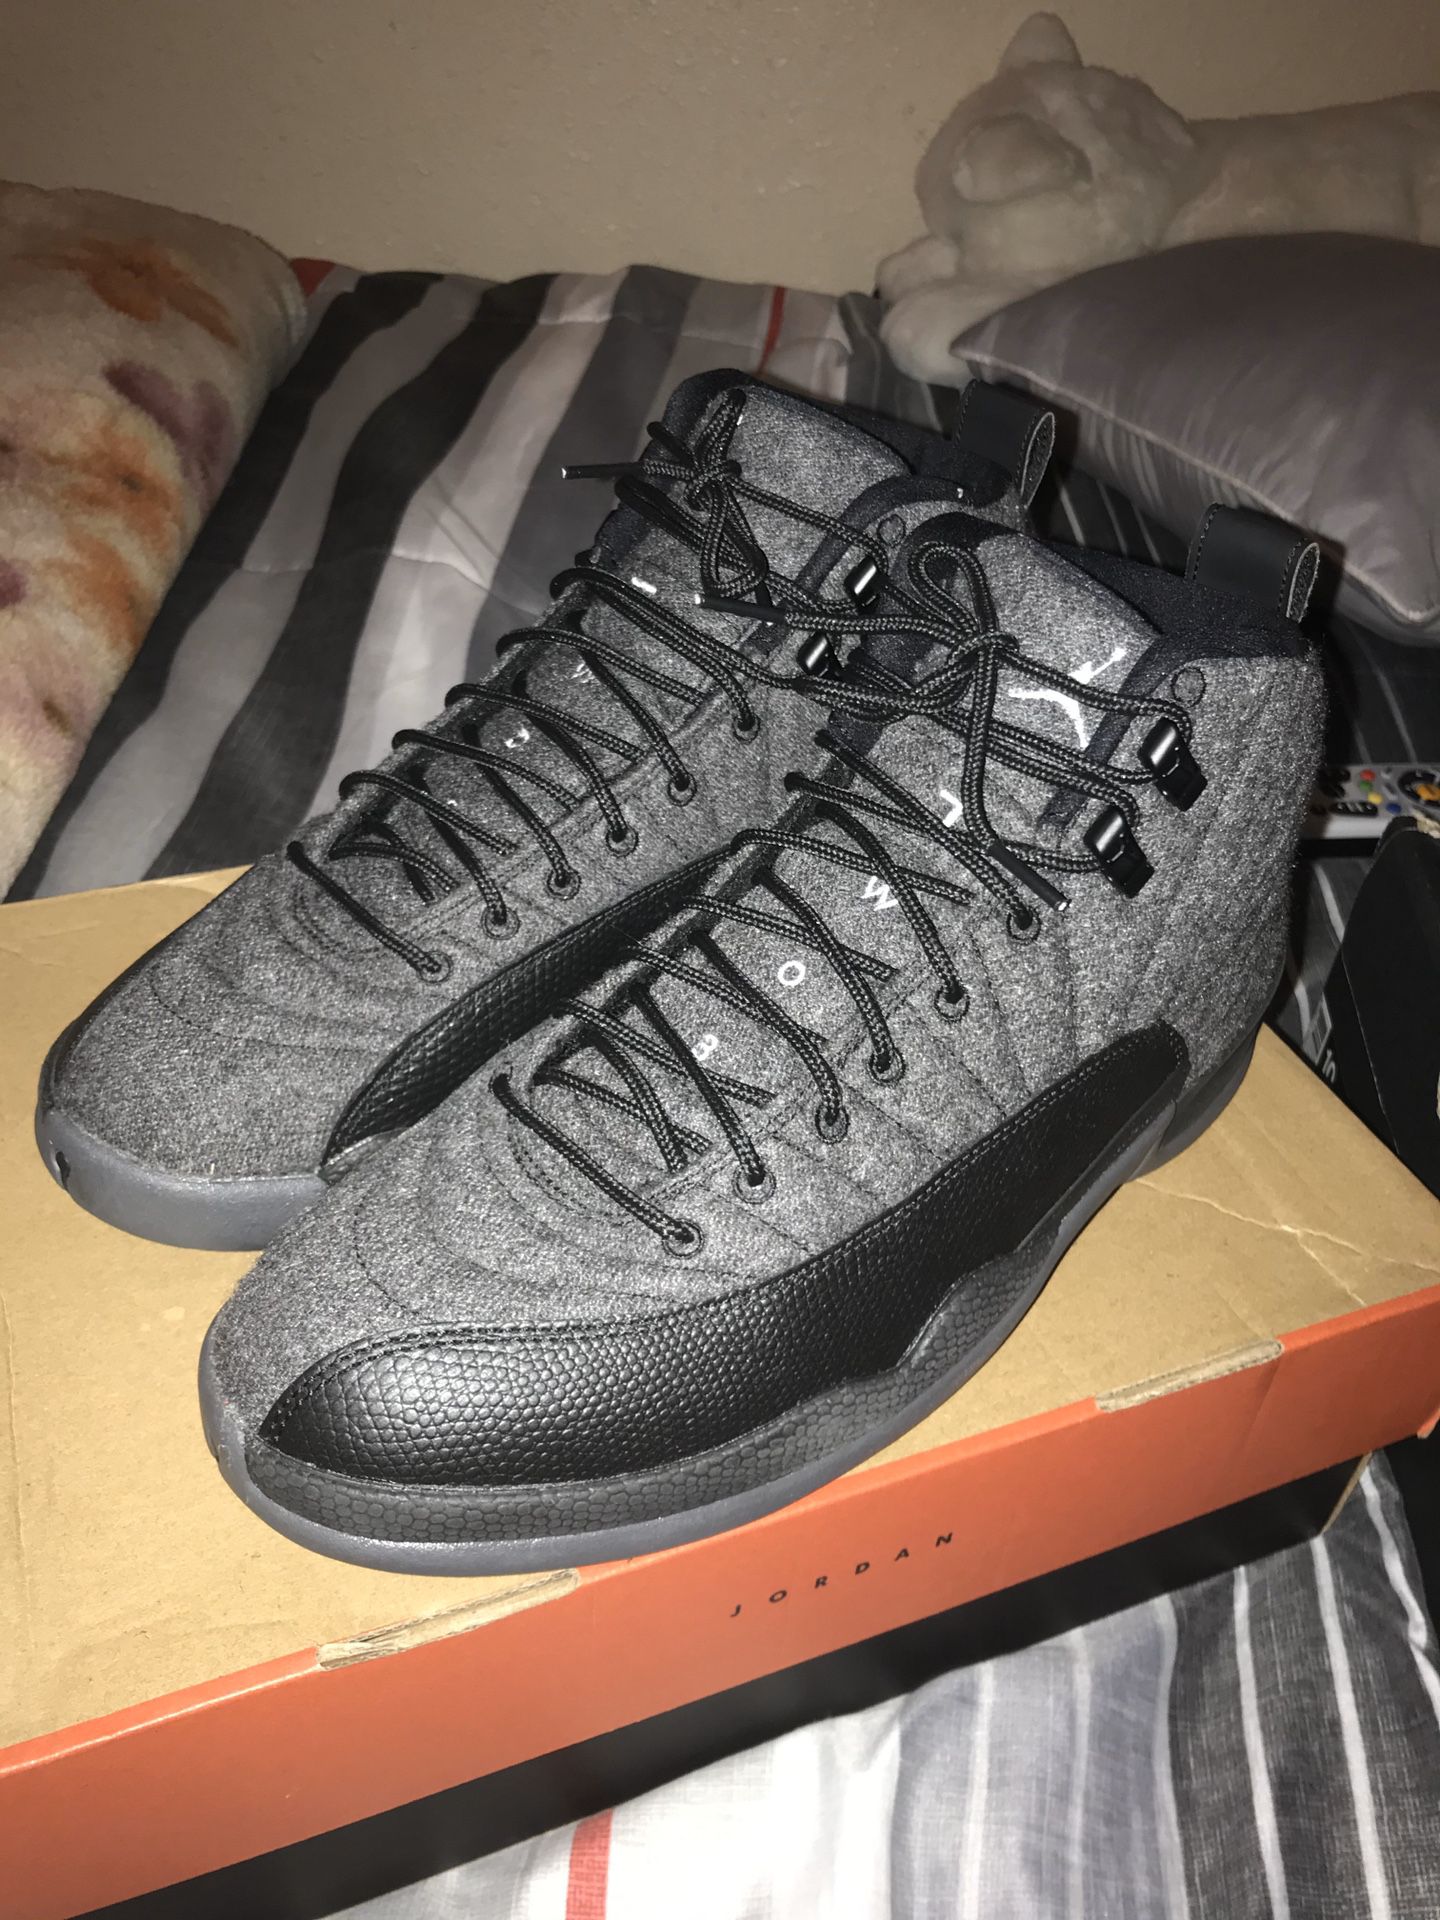 Air Jordan 12s Great Condition Size 10